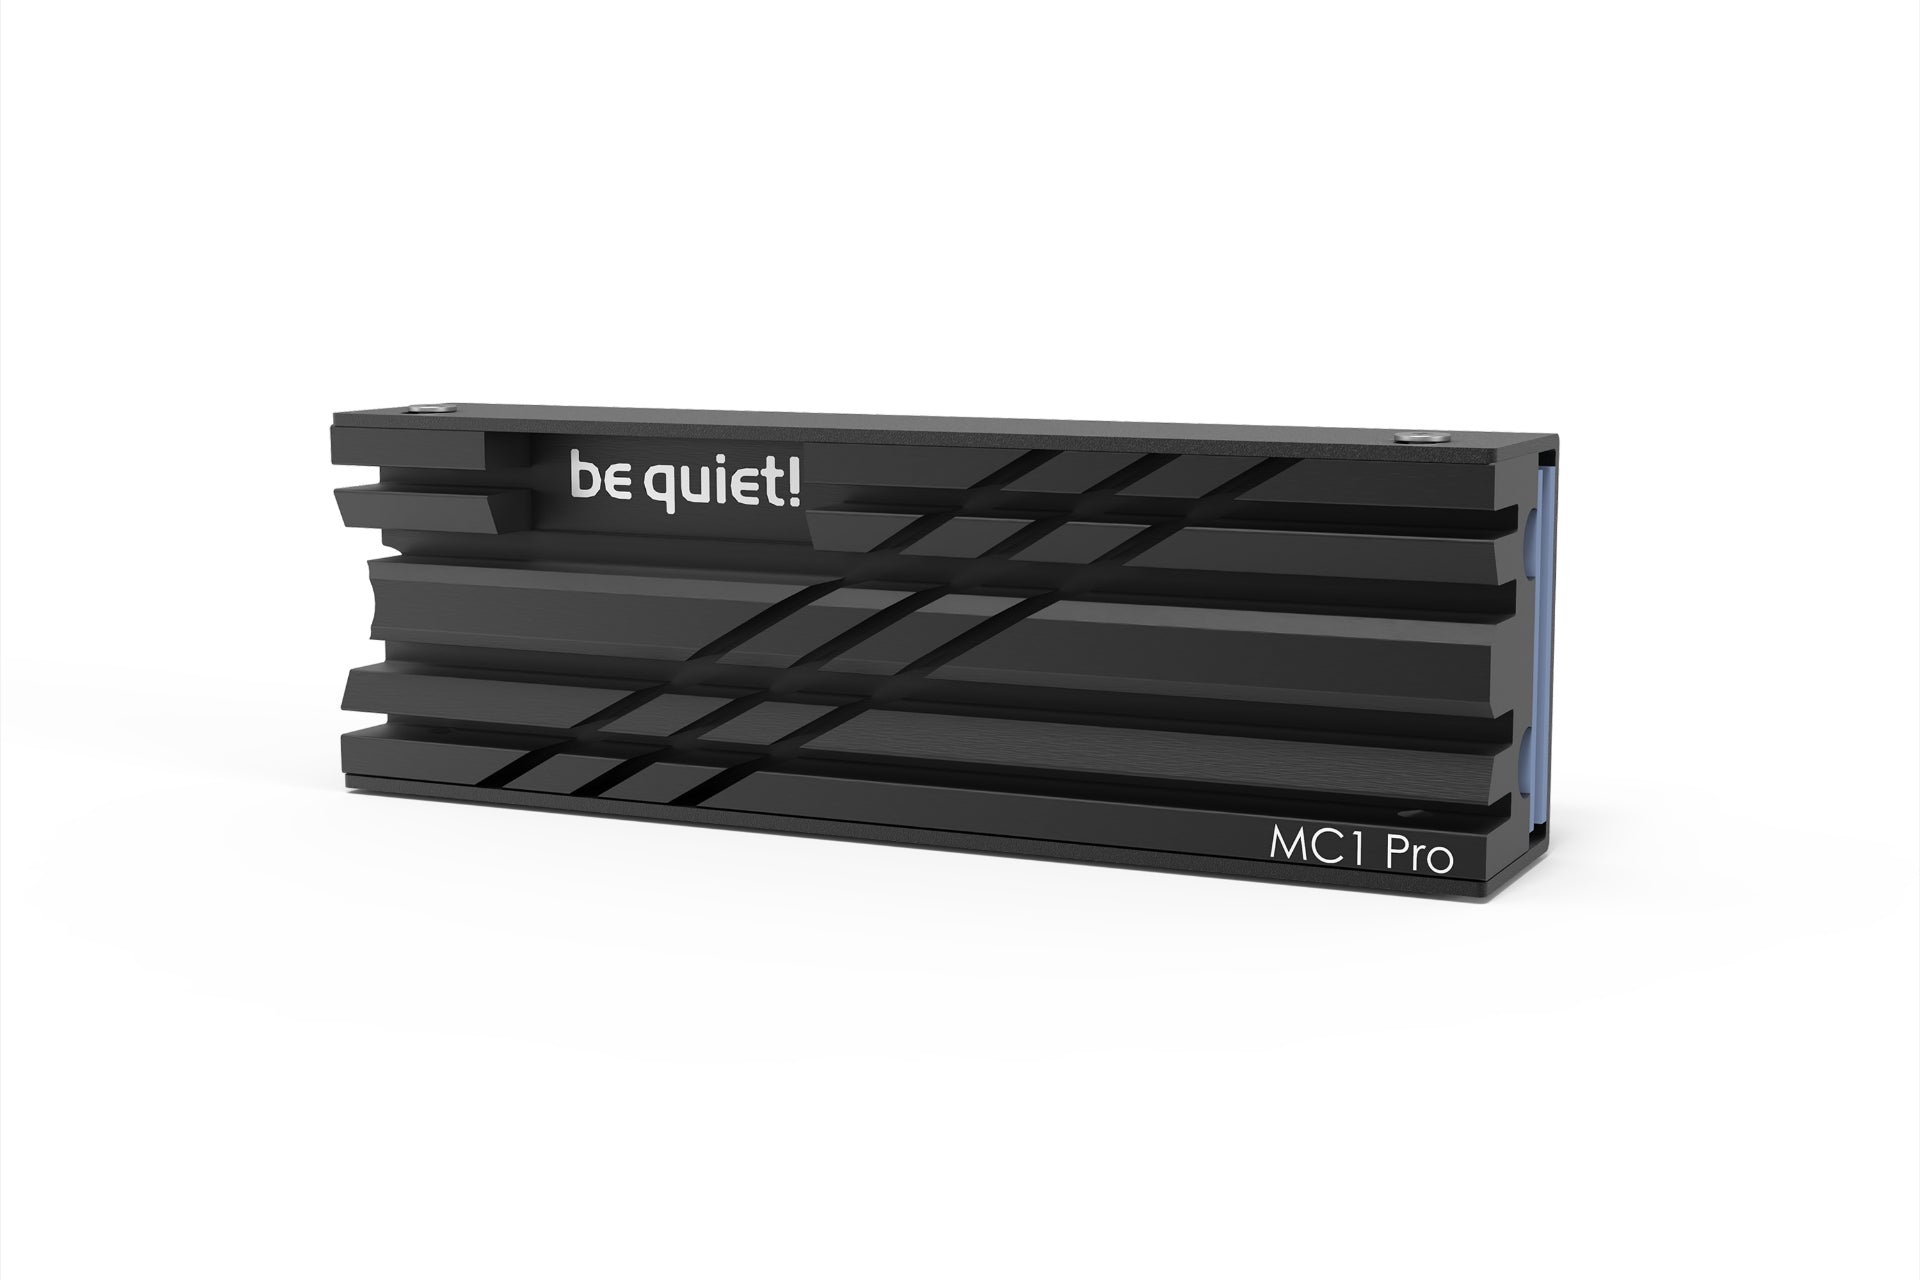 BE QUIET! SSD M.2 COOLING MC1 PRO